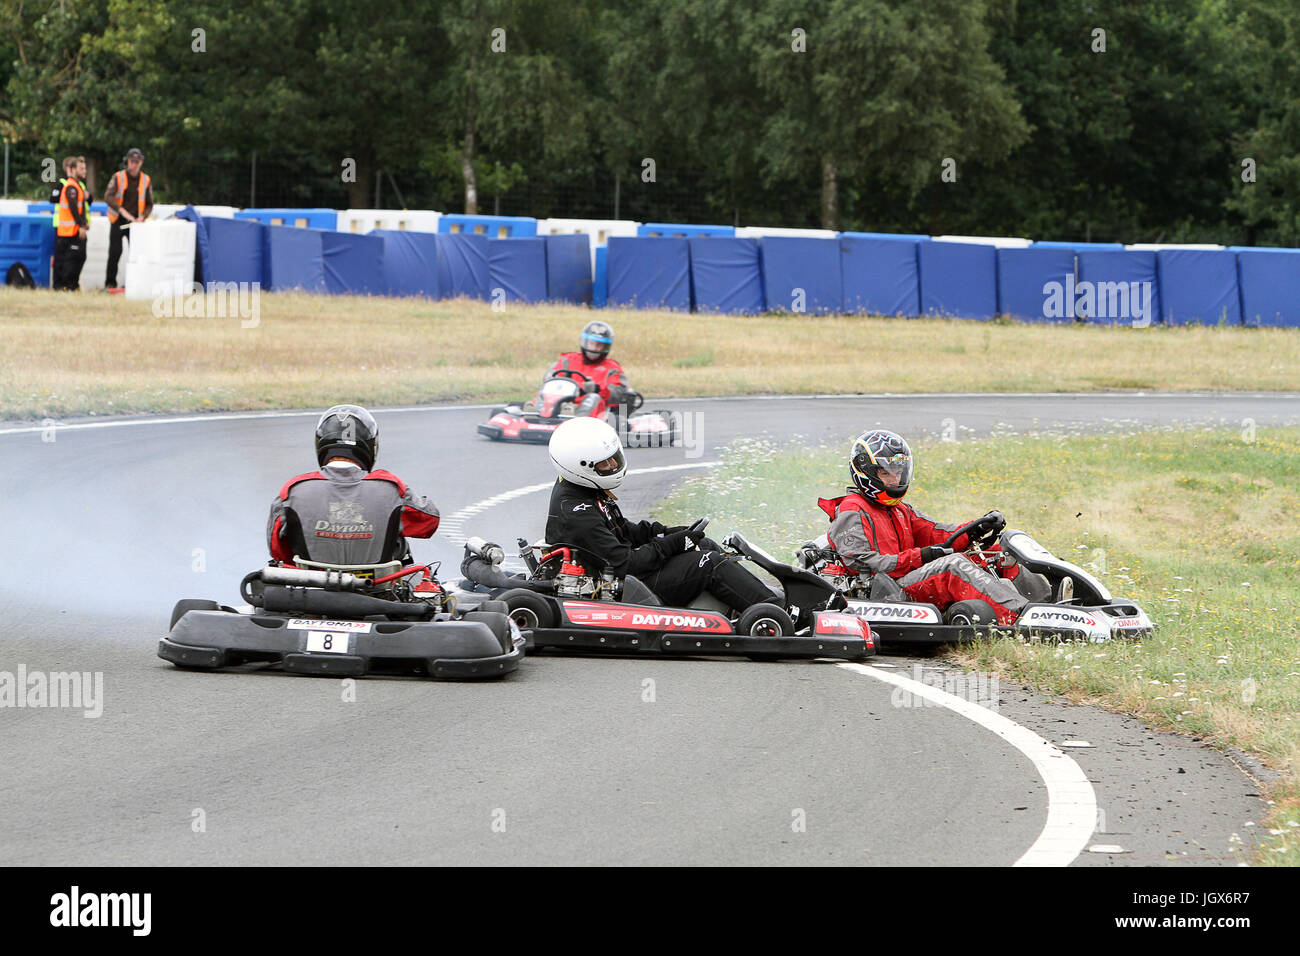 Surrey, UK. 11th Jul, 2017. Teams compete at the Henry Surtees Foundation Brooklands Karting Challenge at Mercedes Benz World in Surrey England 11 July 2017 Credit: theodore liasi/Alamy Live News Stock Photo